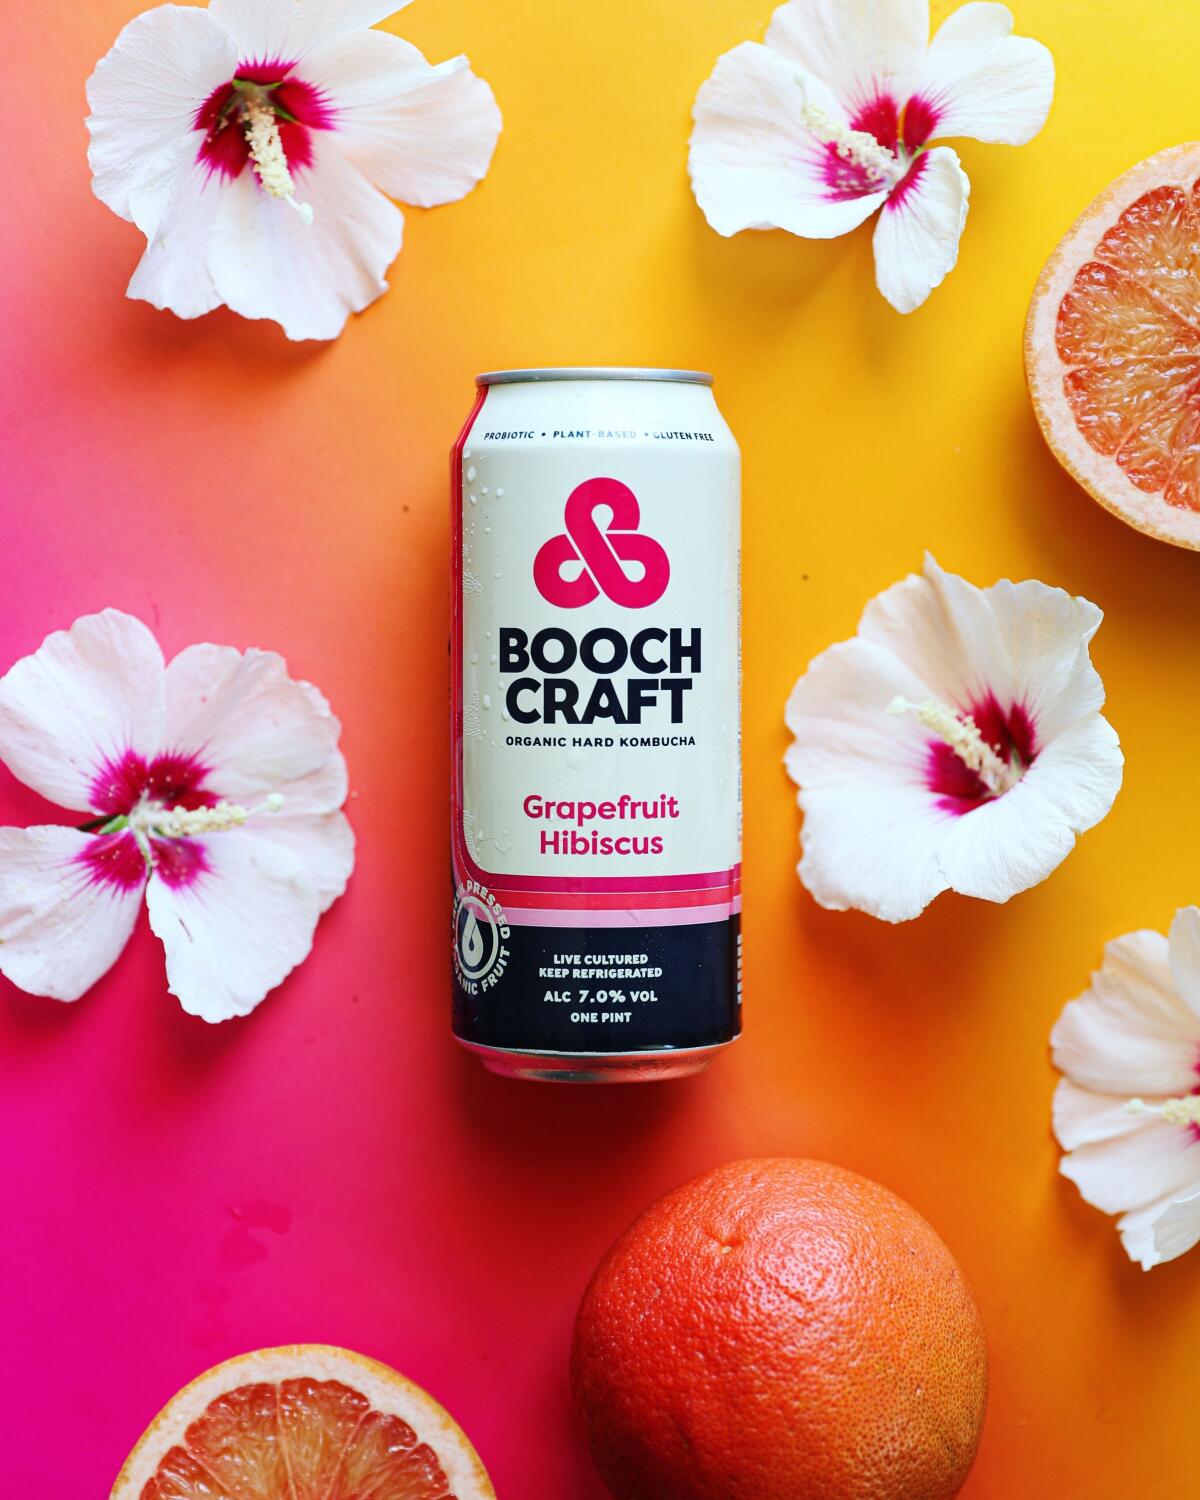 A can of one of Boochcraft's flavors, Grapefruit Hibiscus